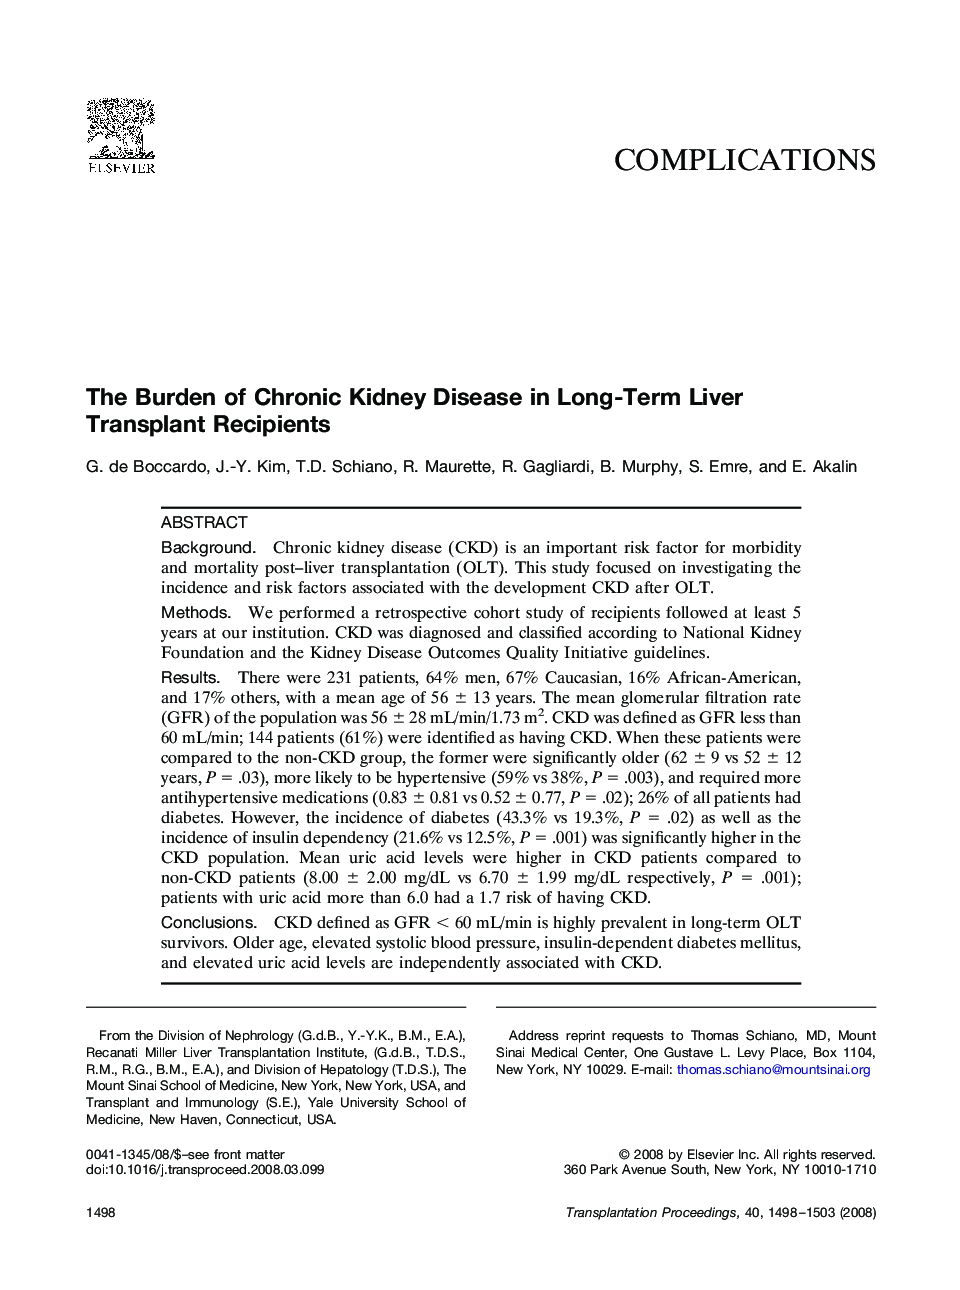 The Burden of Chronic Kidney Disease in Long-Term Liver Transplant Recipients